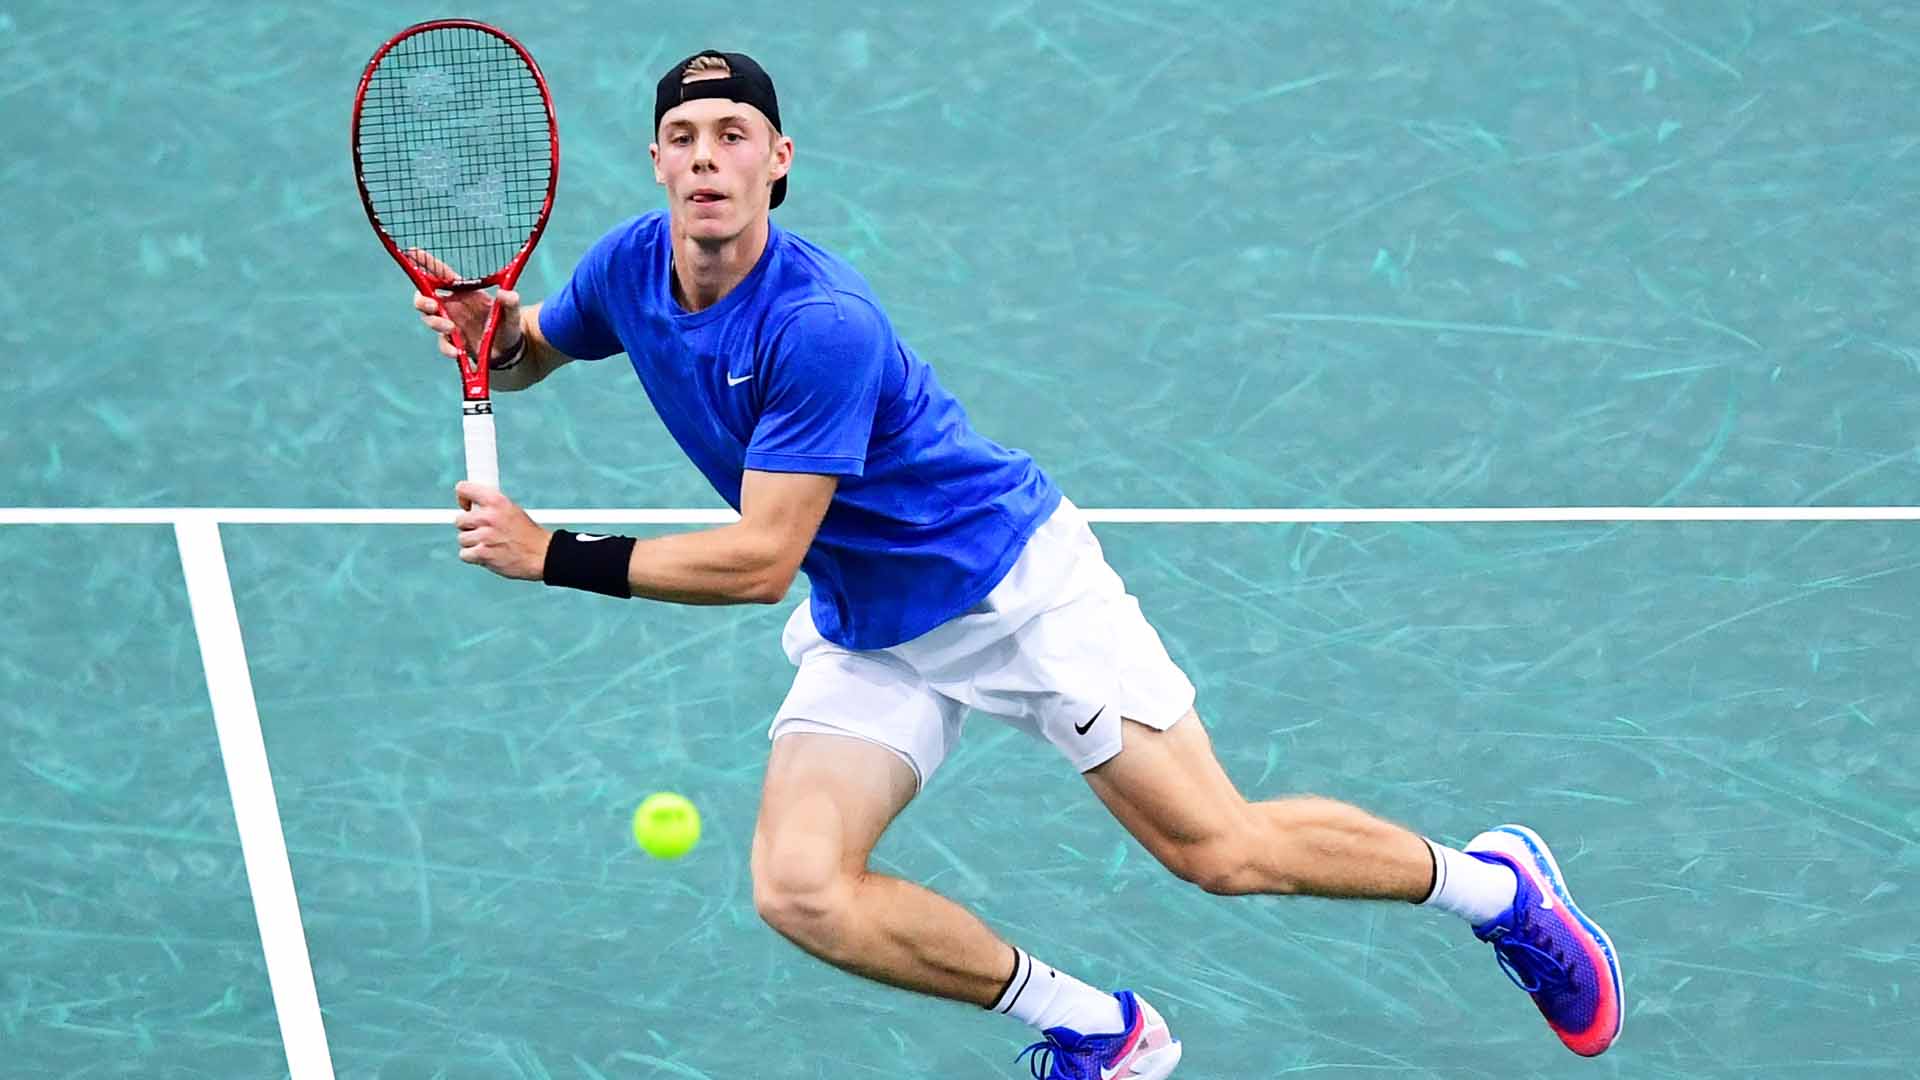 <a href='https://www.atptour.com/en/players/denis-shapovalov/su55/overview'>Denis Shapovalov</a> is aiming to lift his first ATP Masters 1000 trophy this week.